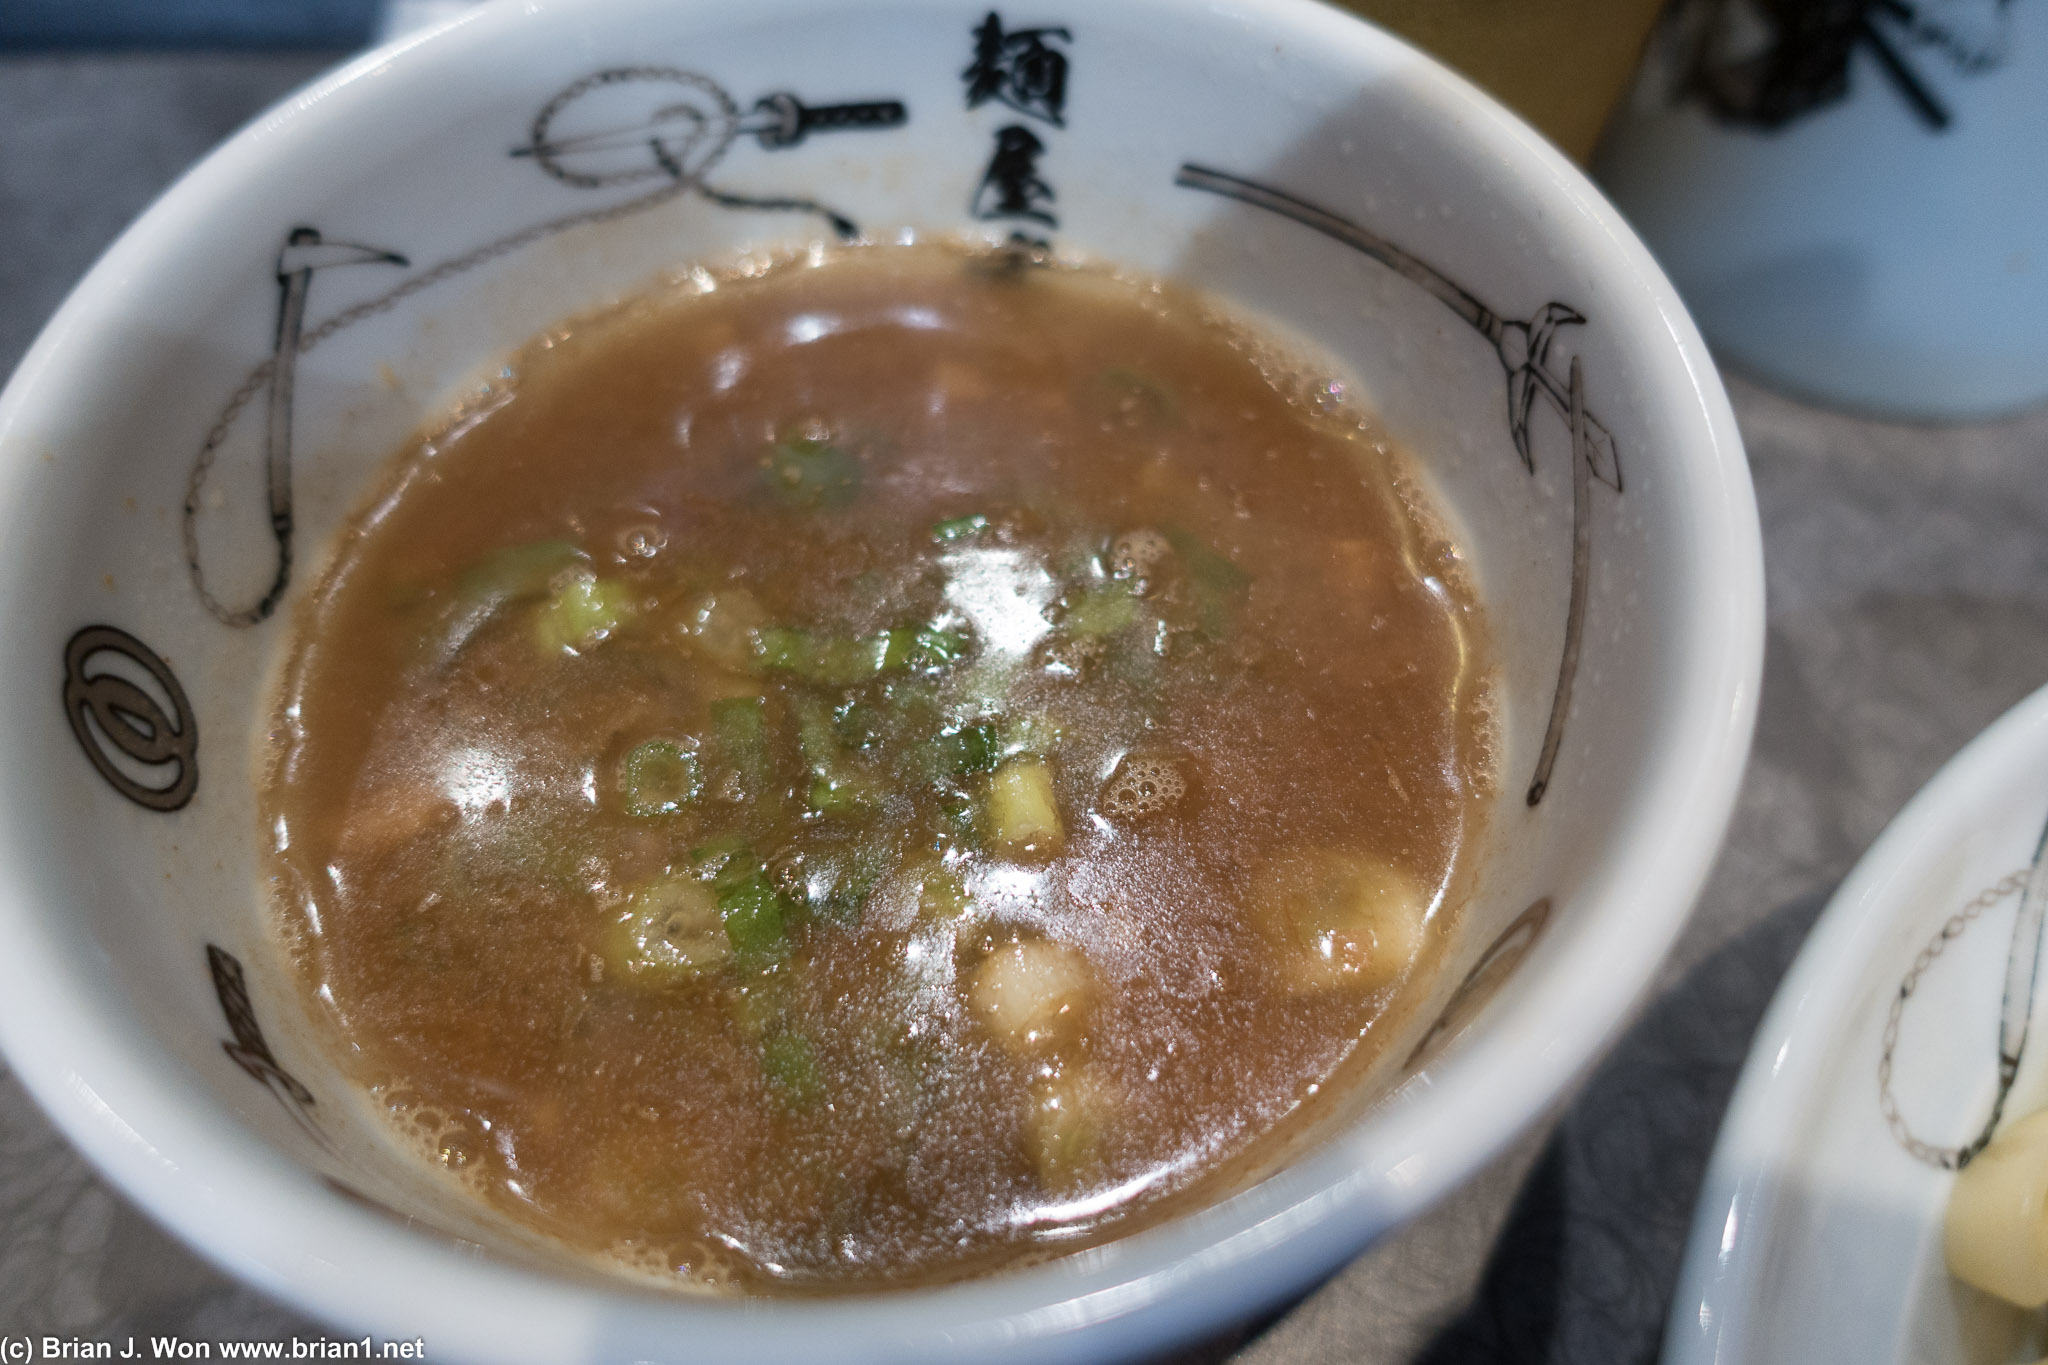 Tsukumen is supposed to be strong broth, but this was a too salty.